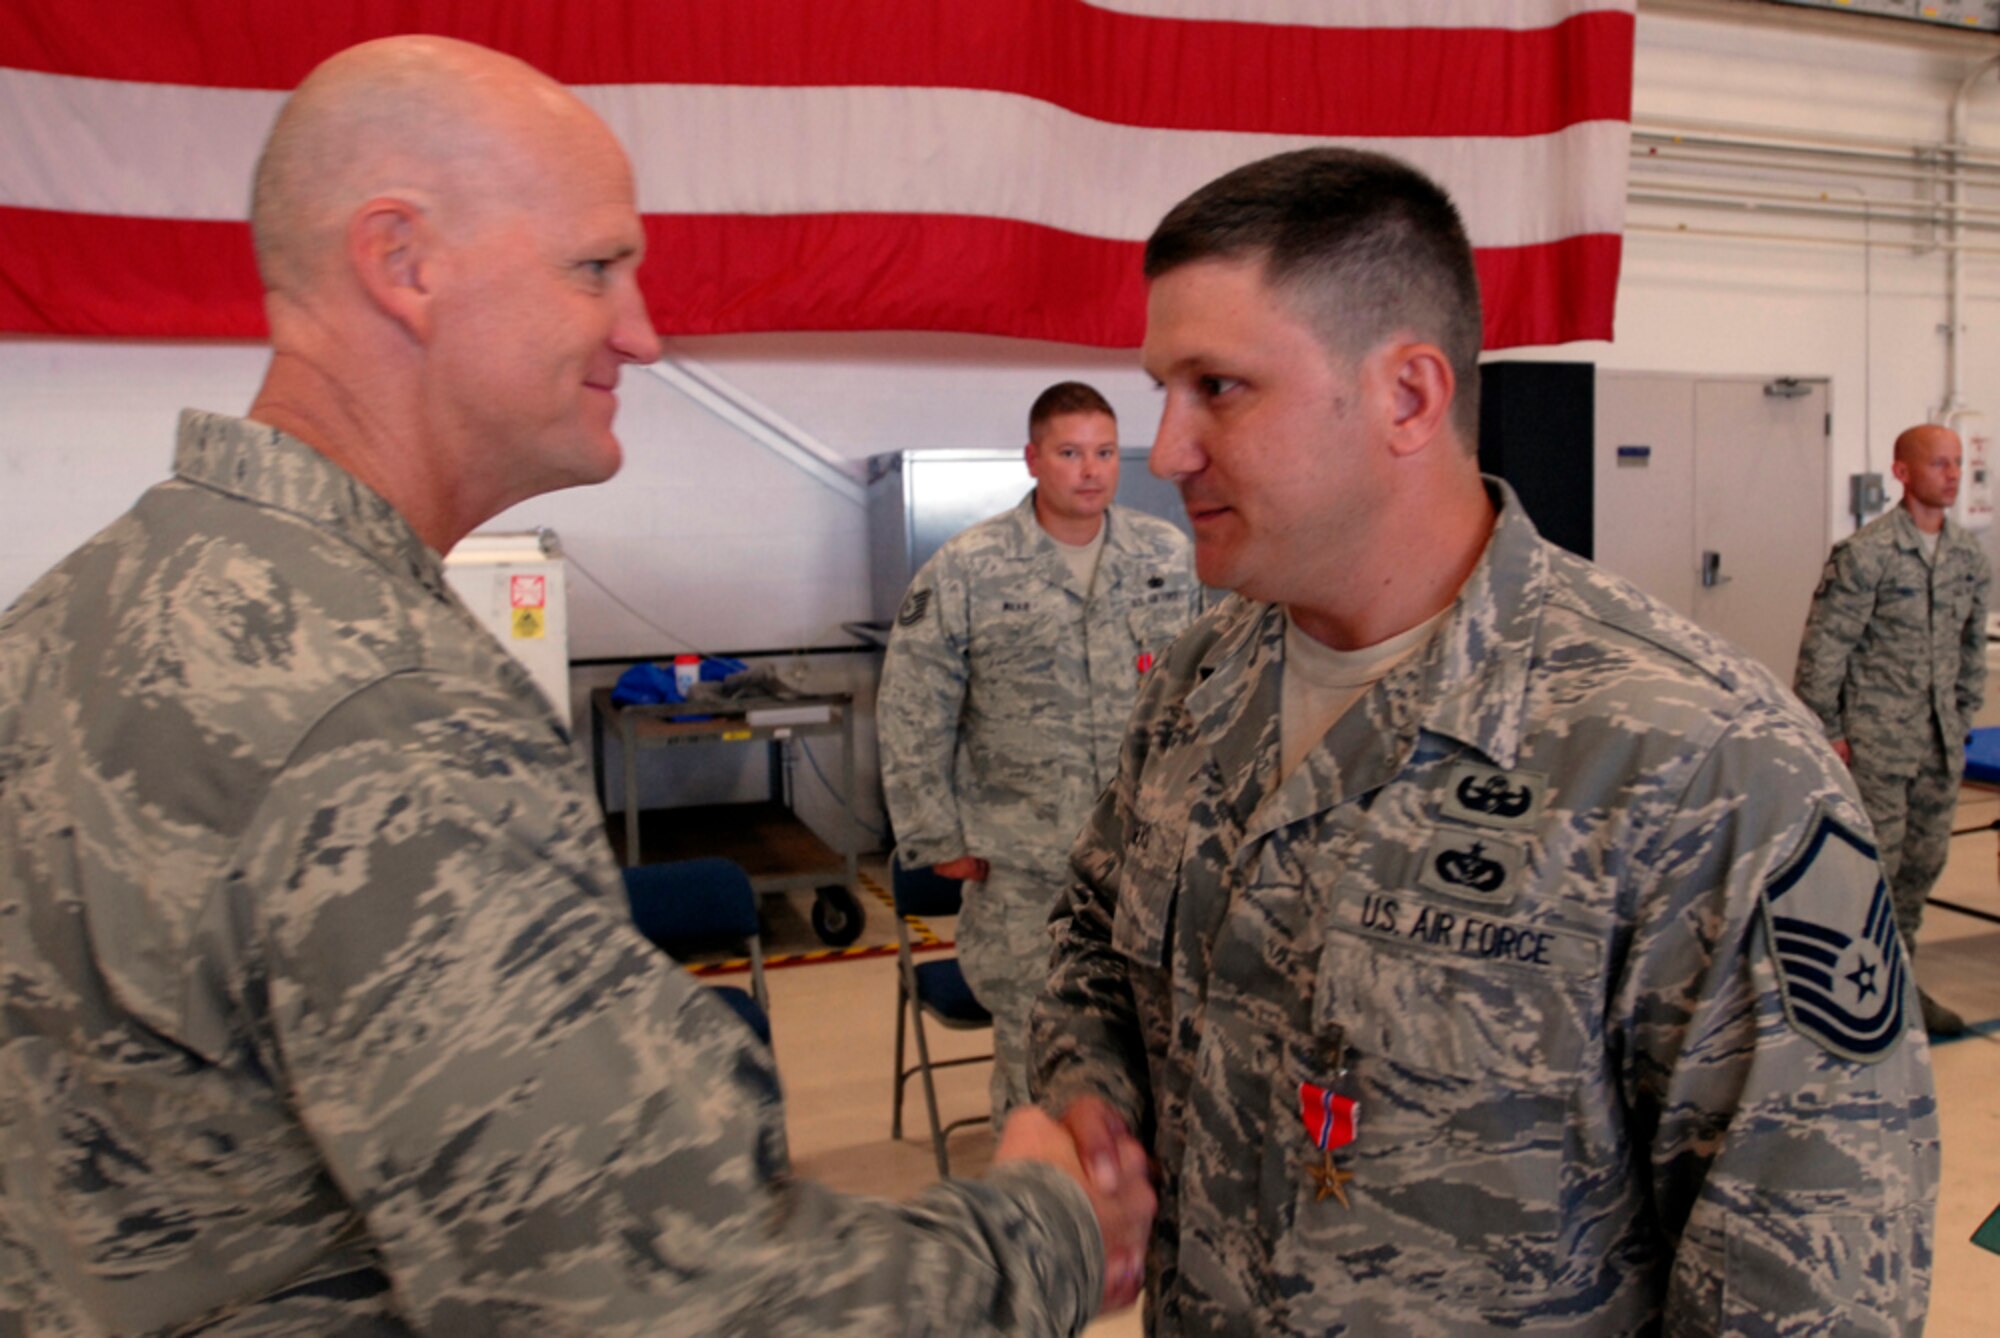 125th Fighter Wing Commander, Col. James Eifert, awards the Bronze Star to Master Sgt. Raleigh Rogers, 125th Explosive Ordinance Disposal (EOD) at a ceremony, August 19, 2012, 125th Fighter Wing, Florida Air National Guard, Jacksonville, Fla. Rogers distinguished himself while performing as an EOD team leader in Ghanzni Province, Afghanistan. Rogers found and cleared over 33 IED's on over 69 combat missions, destroyed over a thousand pounds of enemy weaponry, and cleared over 1200 miles of routes allowing freedom of movement for both special and conventional coalition forces.(Air National Guard photo by Staff Sgt. Jeremy Brownfield)